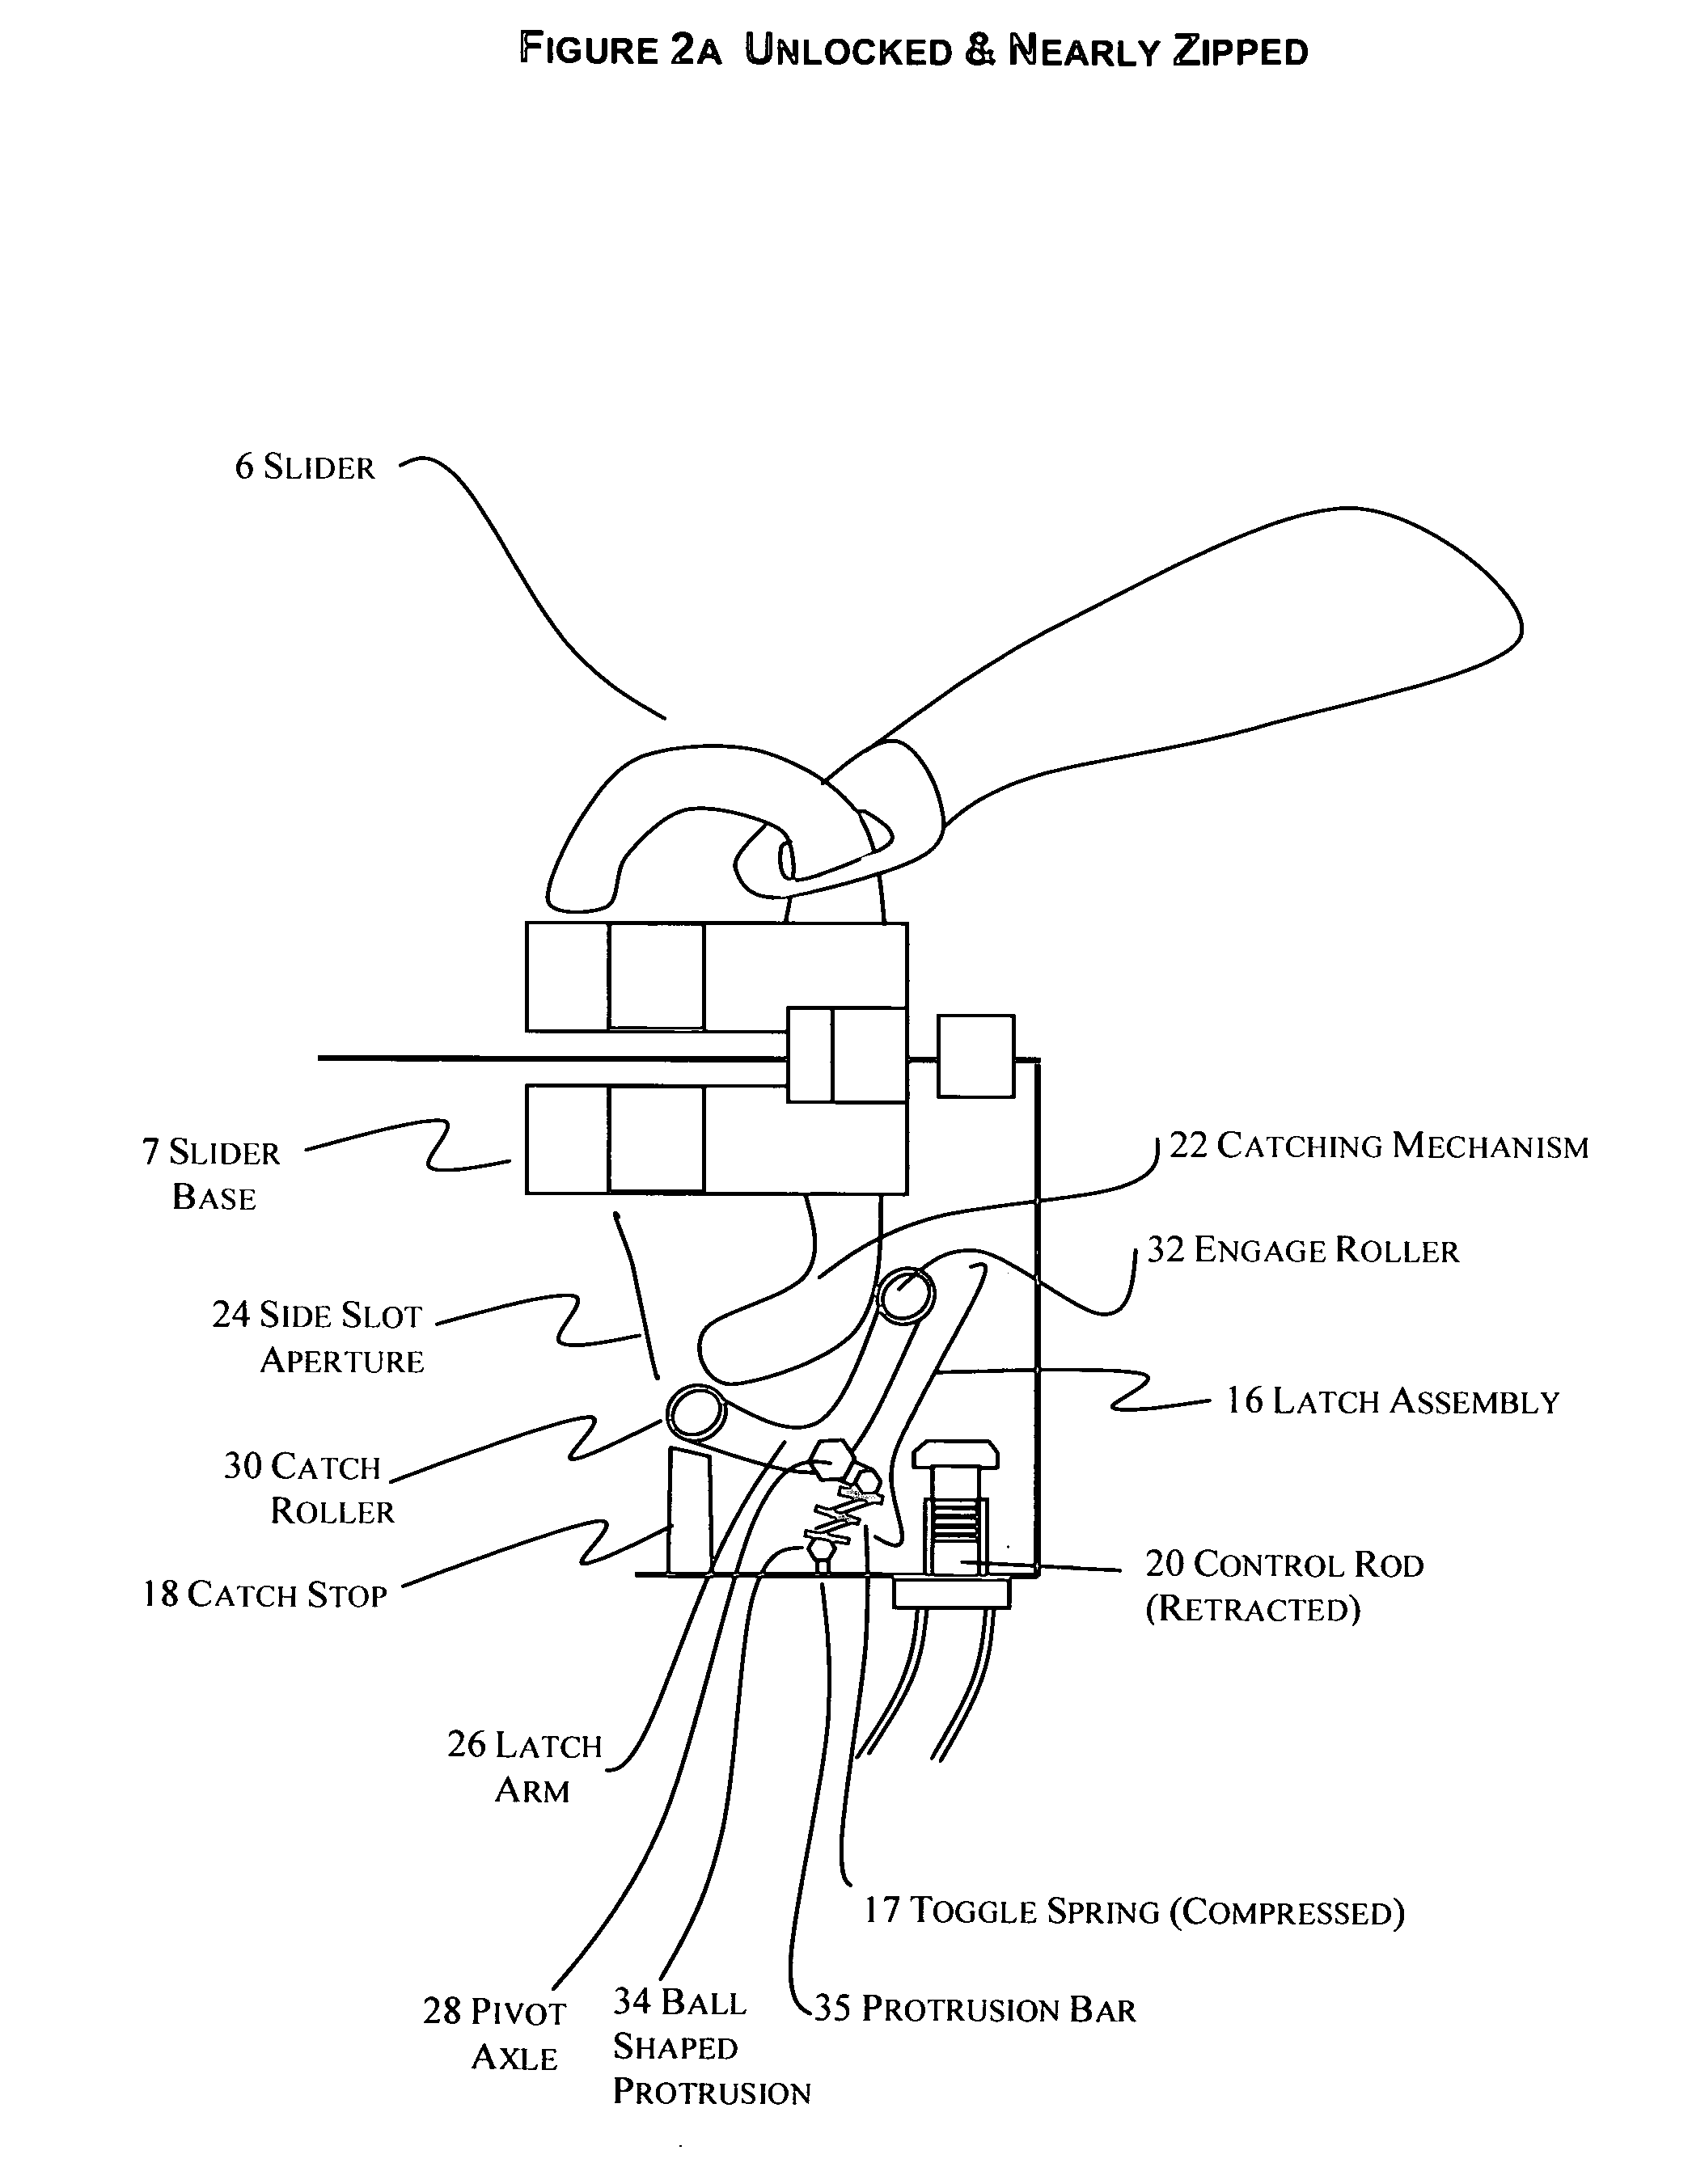 System and apparatus for securing an item using a biometric lock